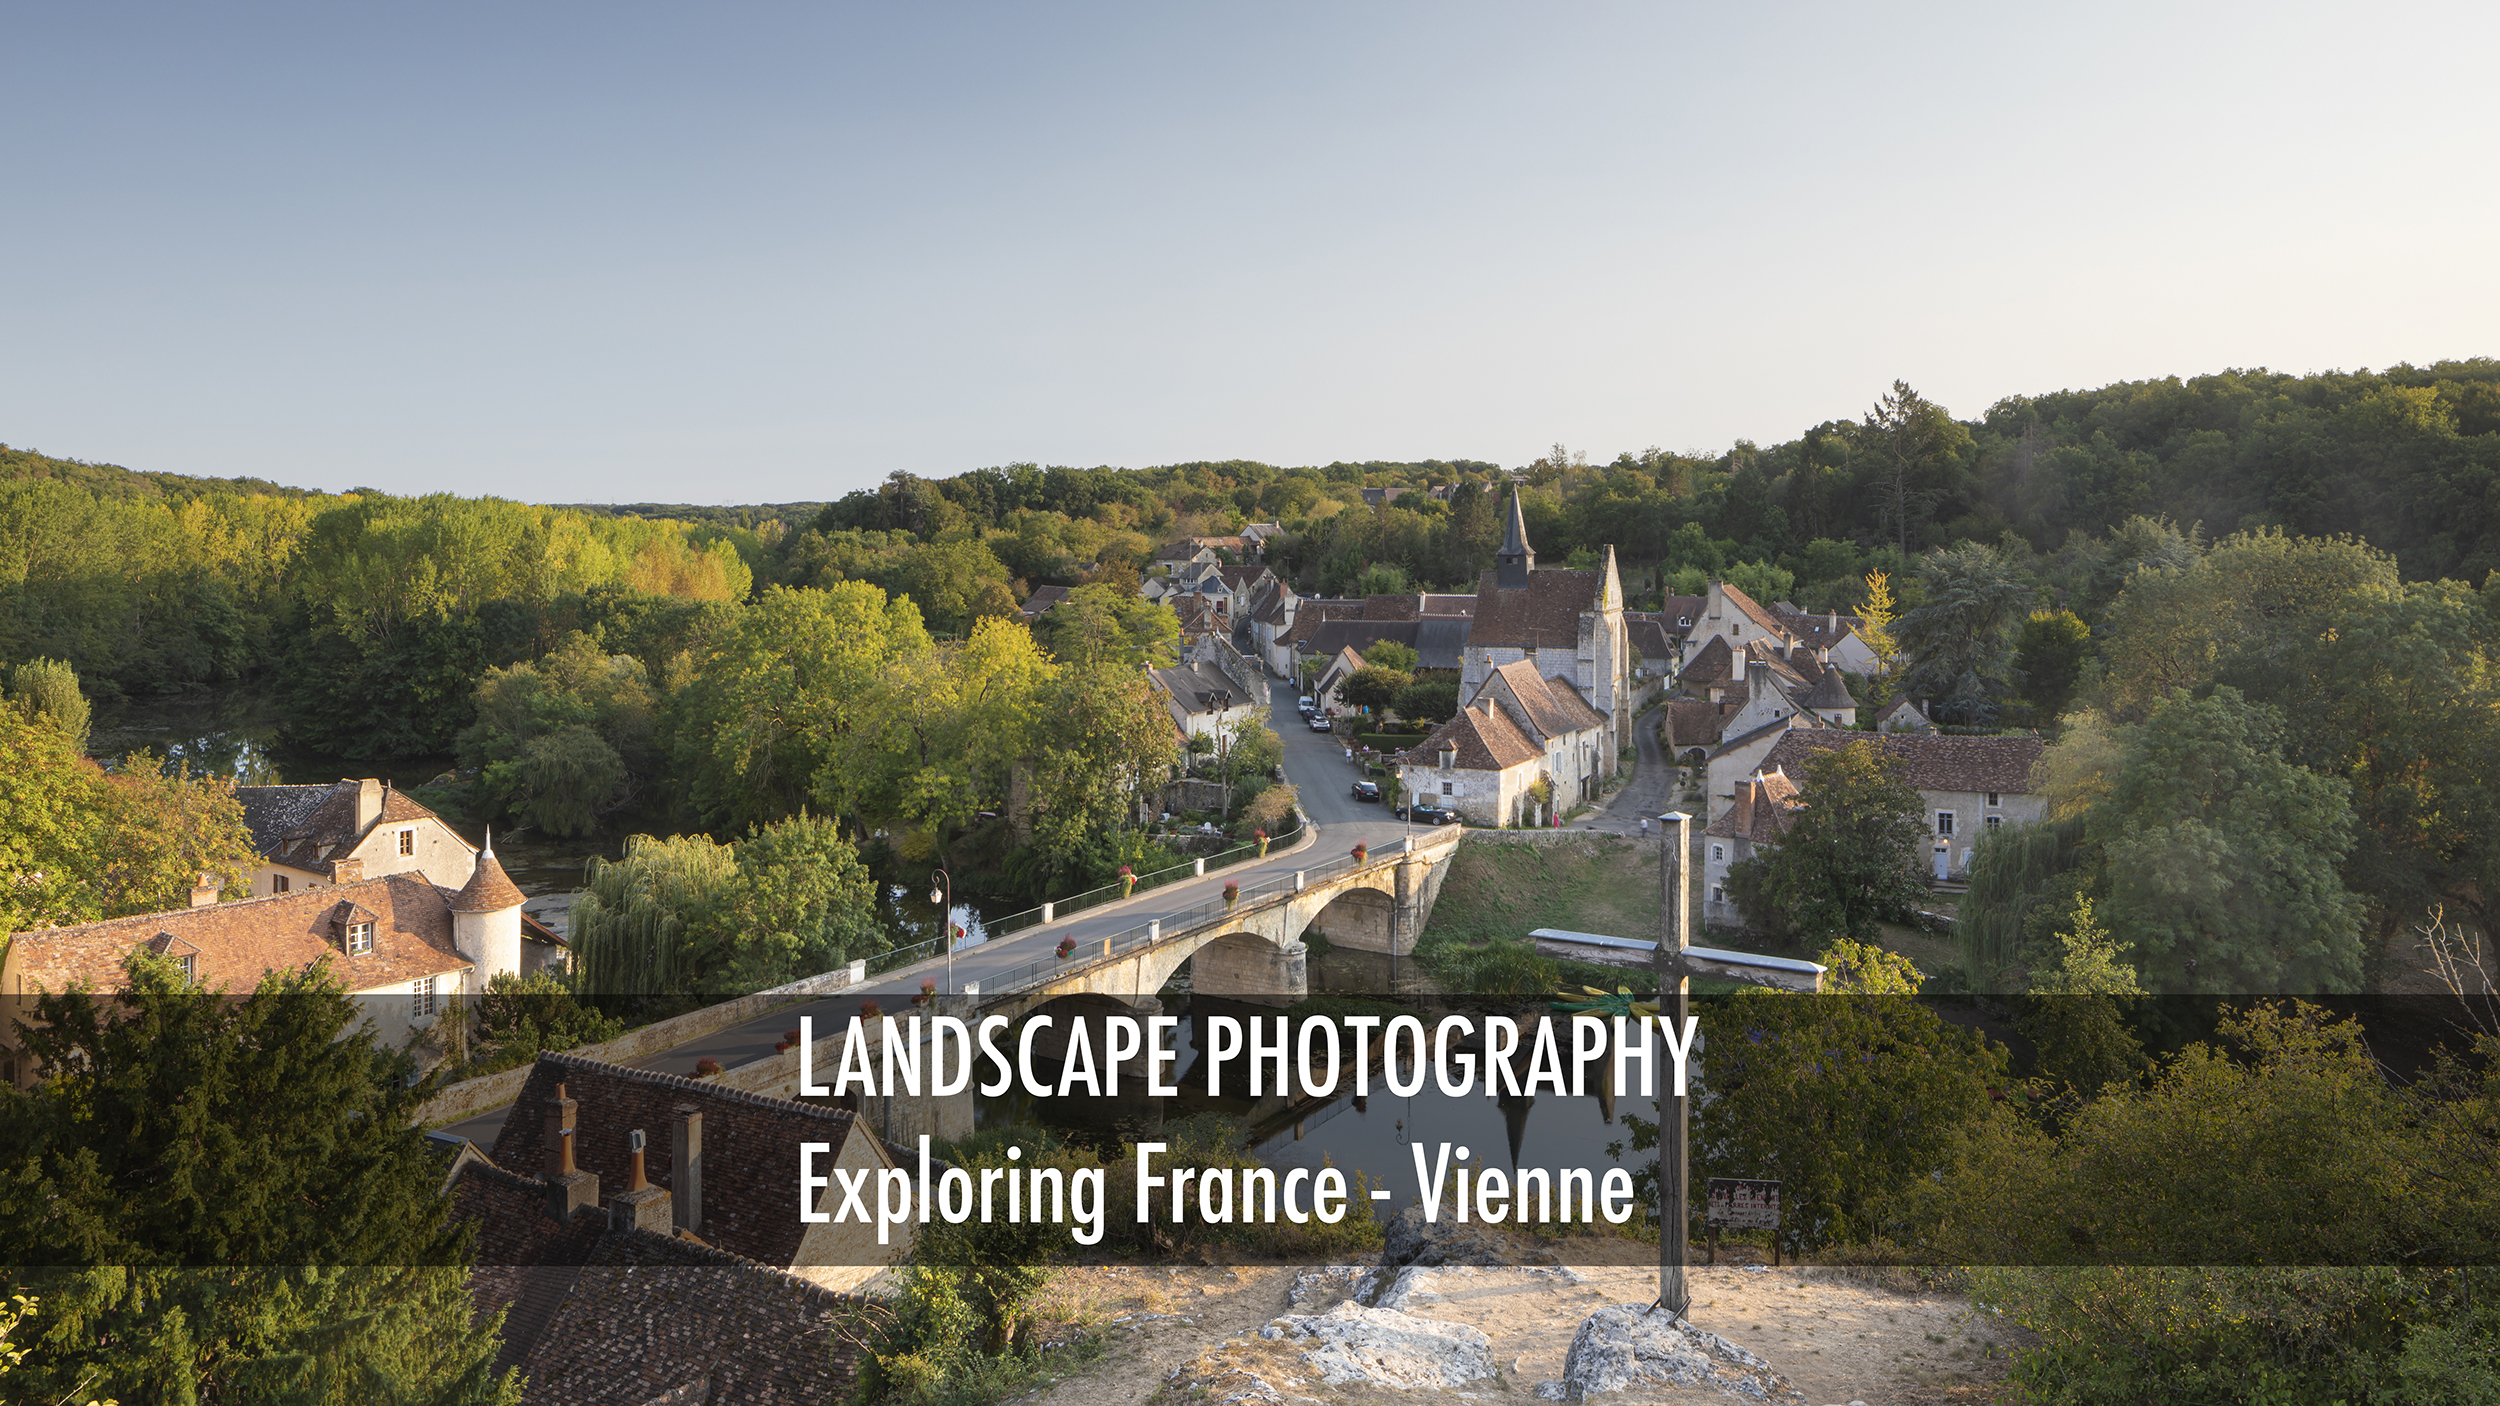 Exploring France in the department of Vienne. Landscape photography.